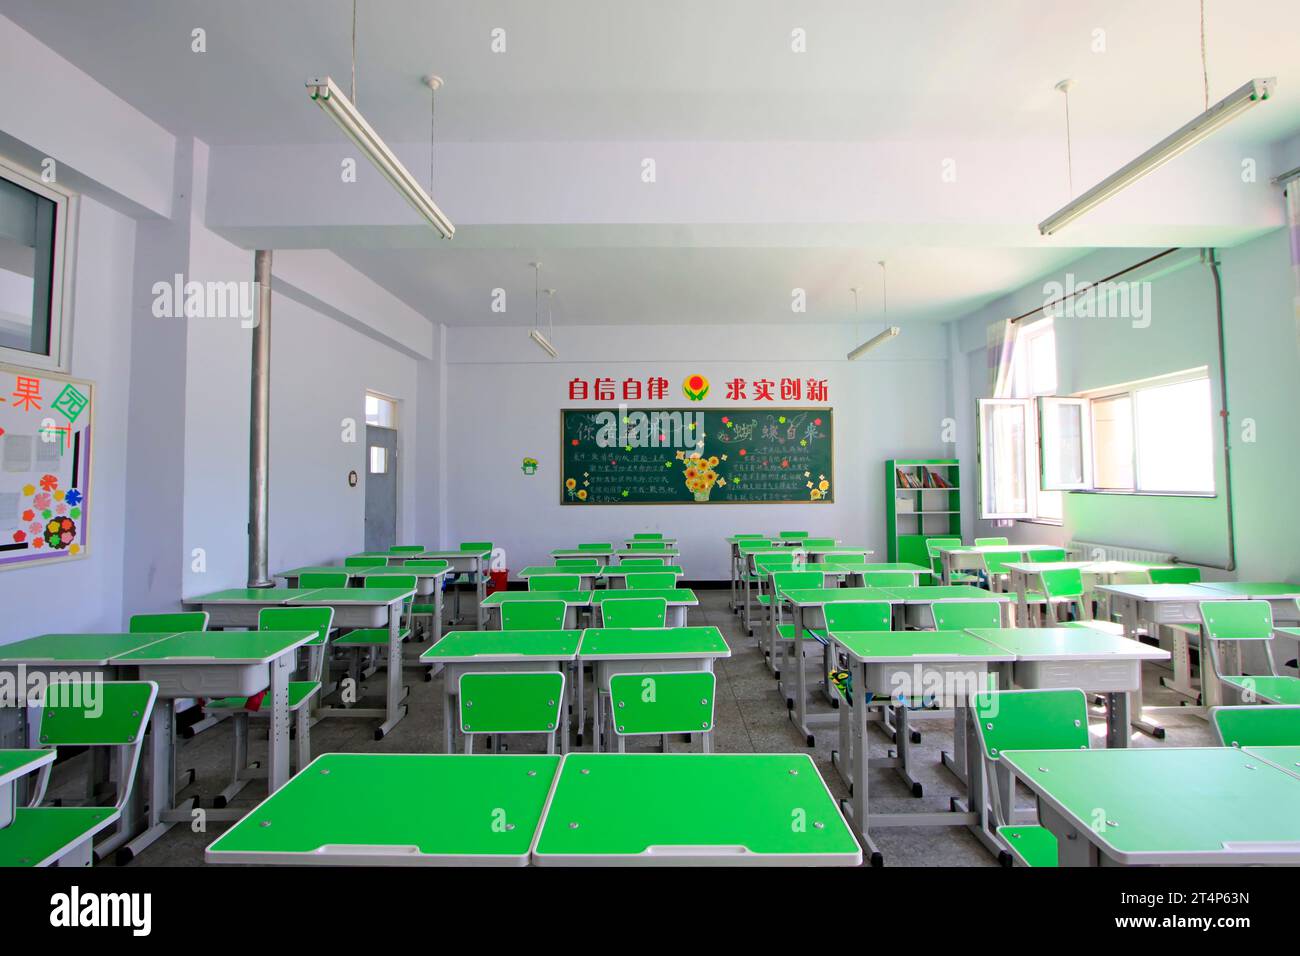 Desks and chairs in the primary school classroom, China Stock Photo